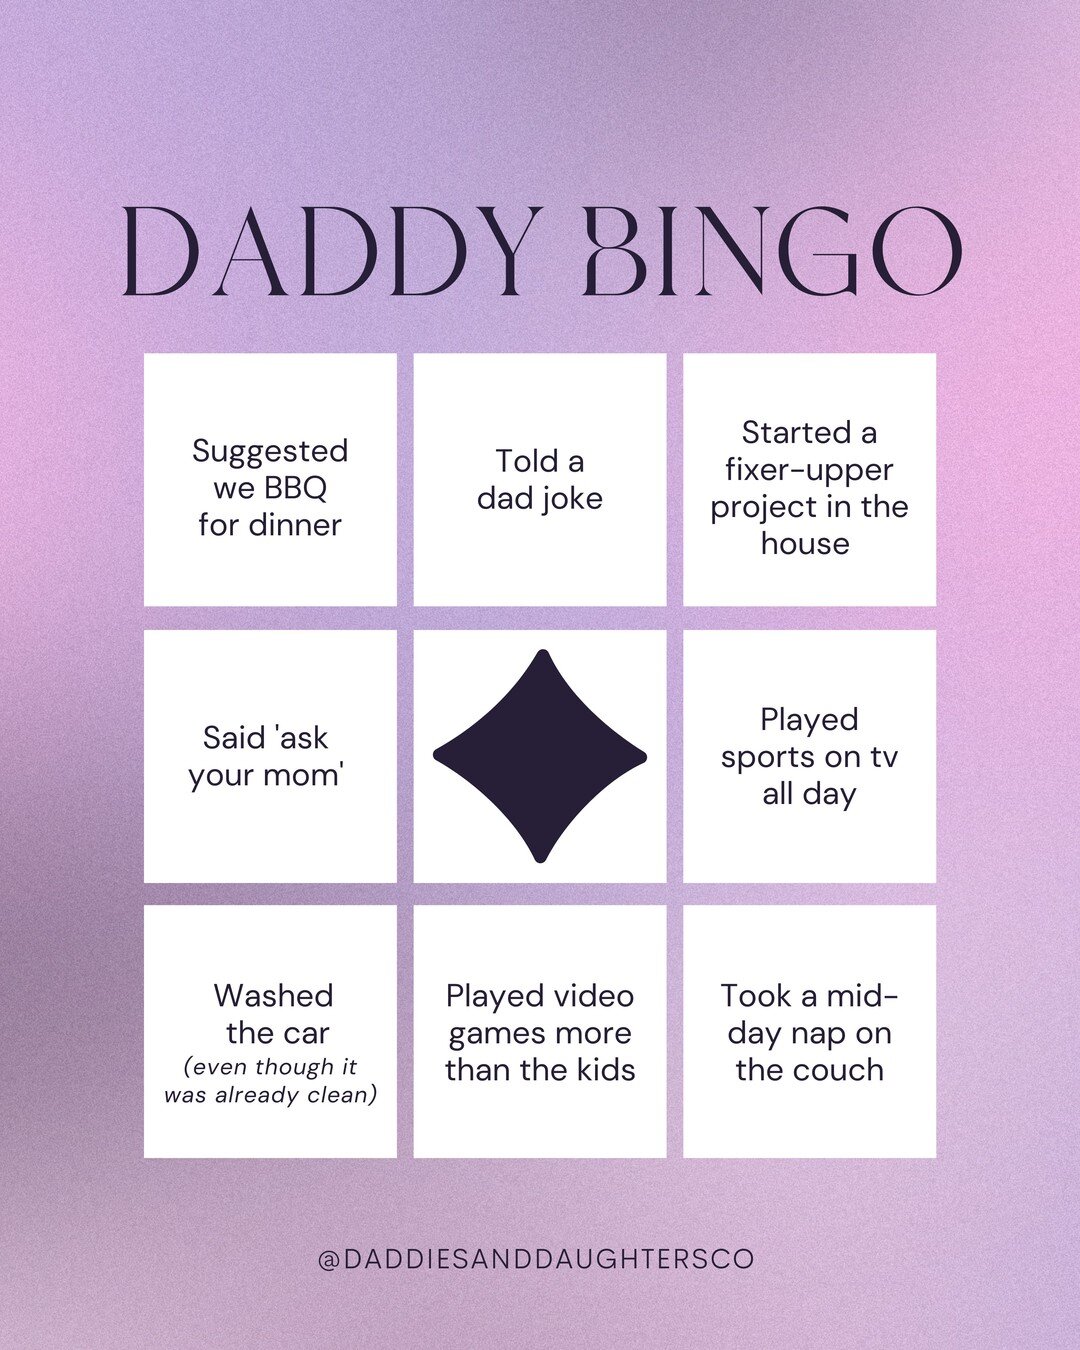 Everyone knows a dad who's done a fair share of these things, don't we? 😅

Let us know if you got bingo or tag a dad who needs to play!
.
.
.
.
.
.
#blackparentsunited #blackparentsbelike #blackparents #girldad  #blackfamilygoals #muslimfamily #musl